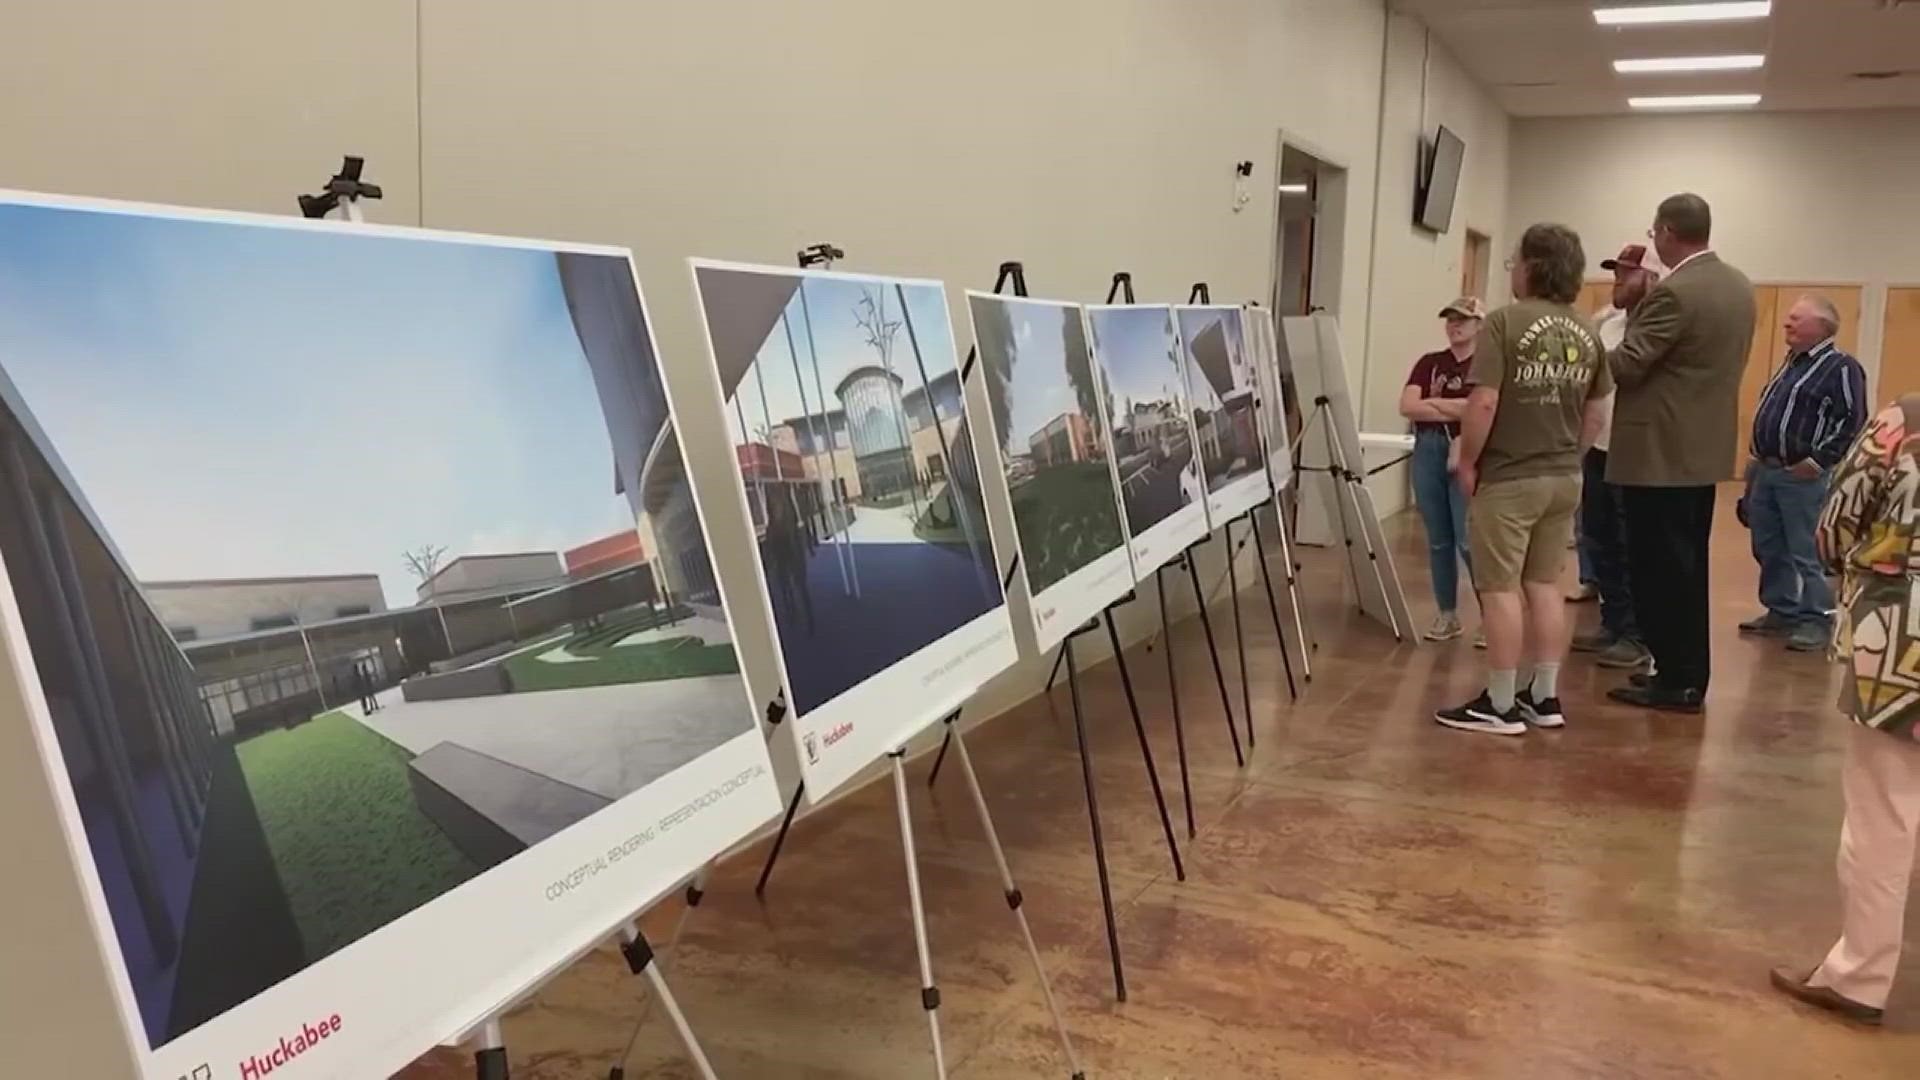 The community group tasked with devising plans for the new school in the wake of the Robb Elementary attack provided an update Wednesday evening.